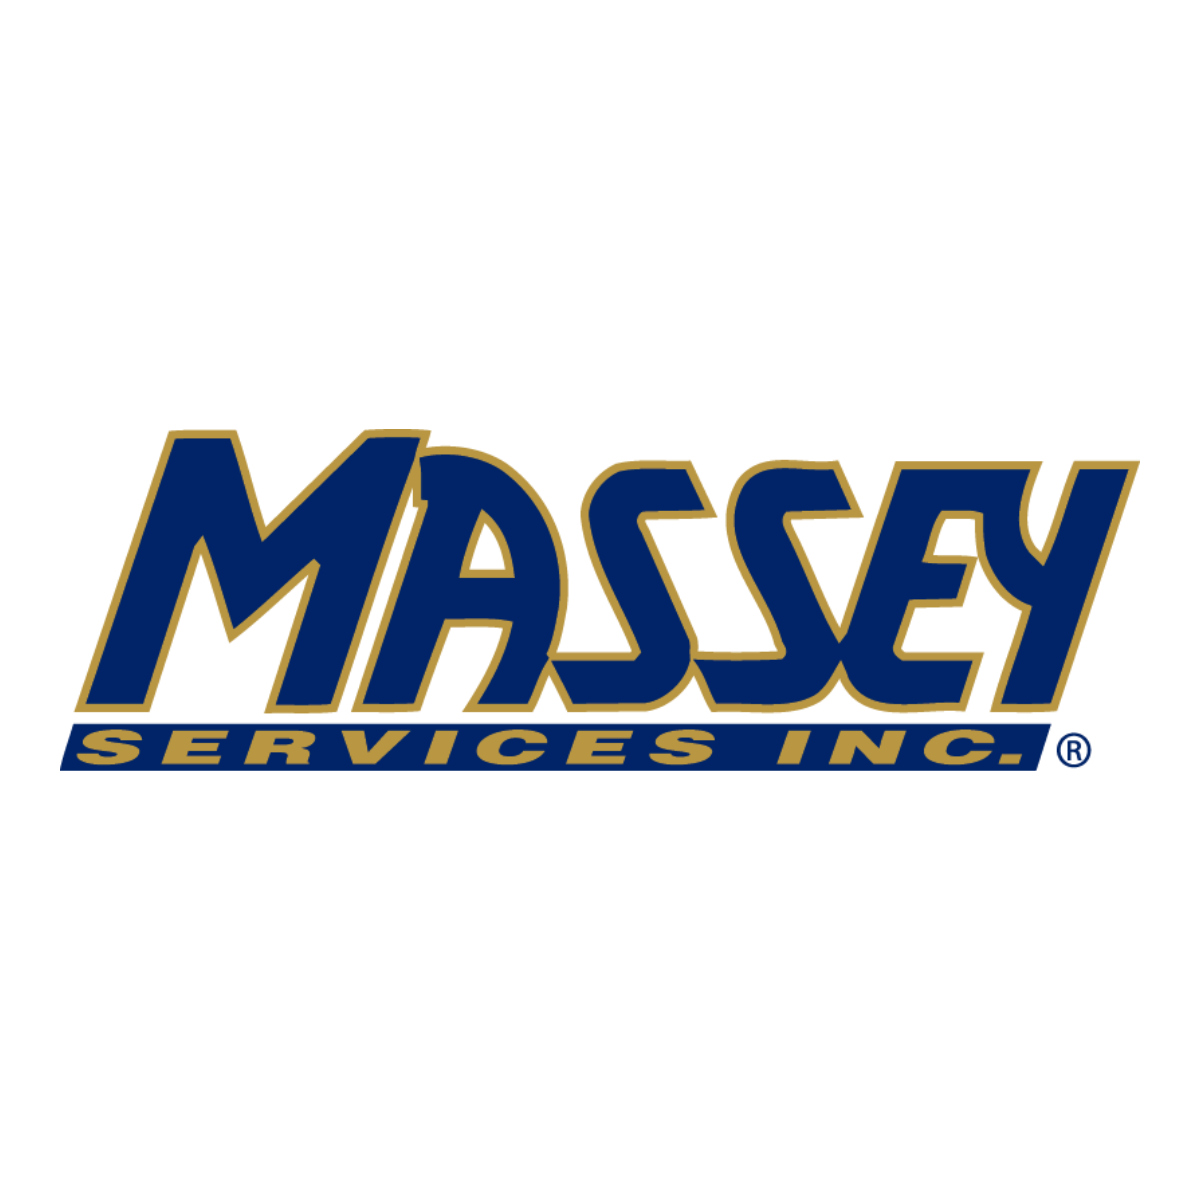 Work With Massey Services | Career Opportunities | Join Our Team Here!
